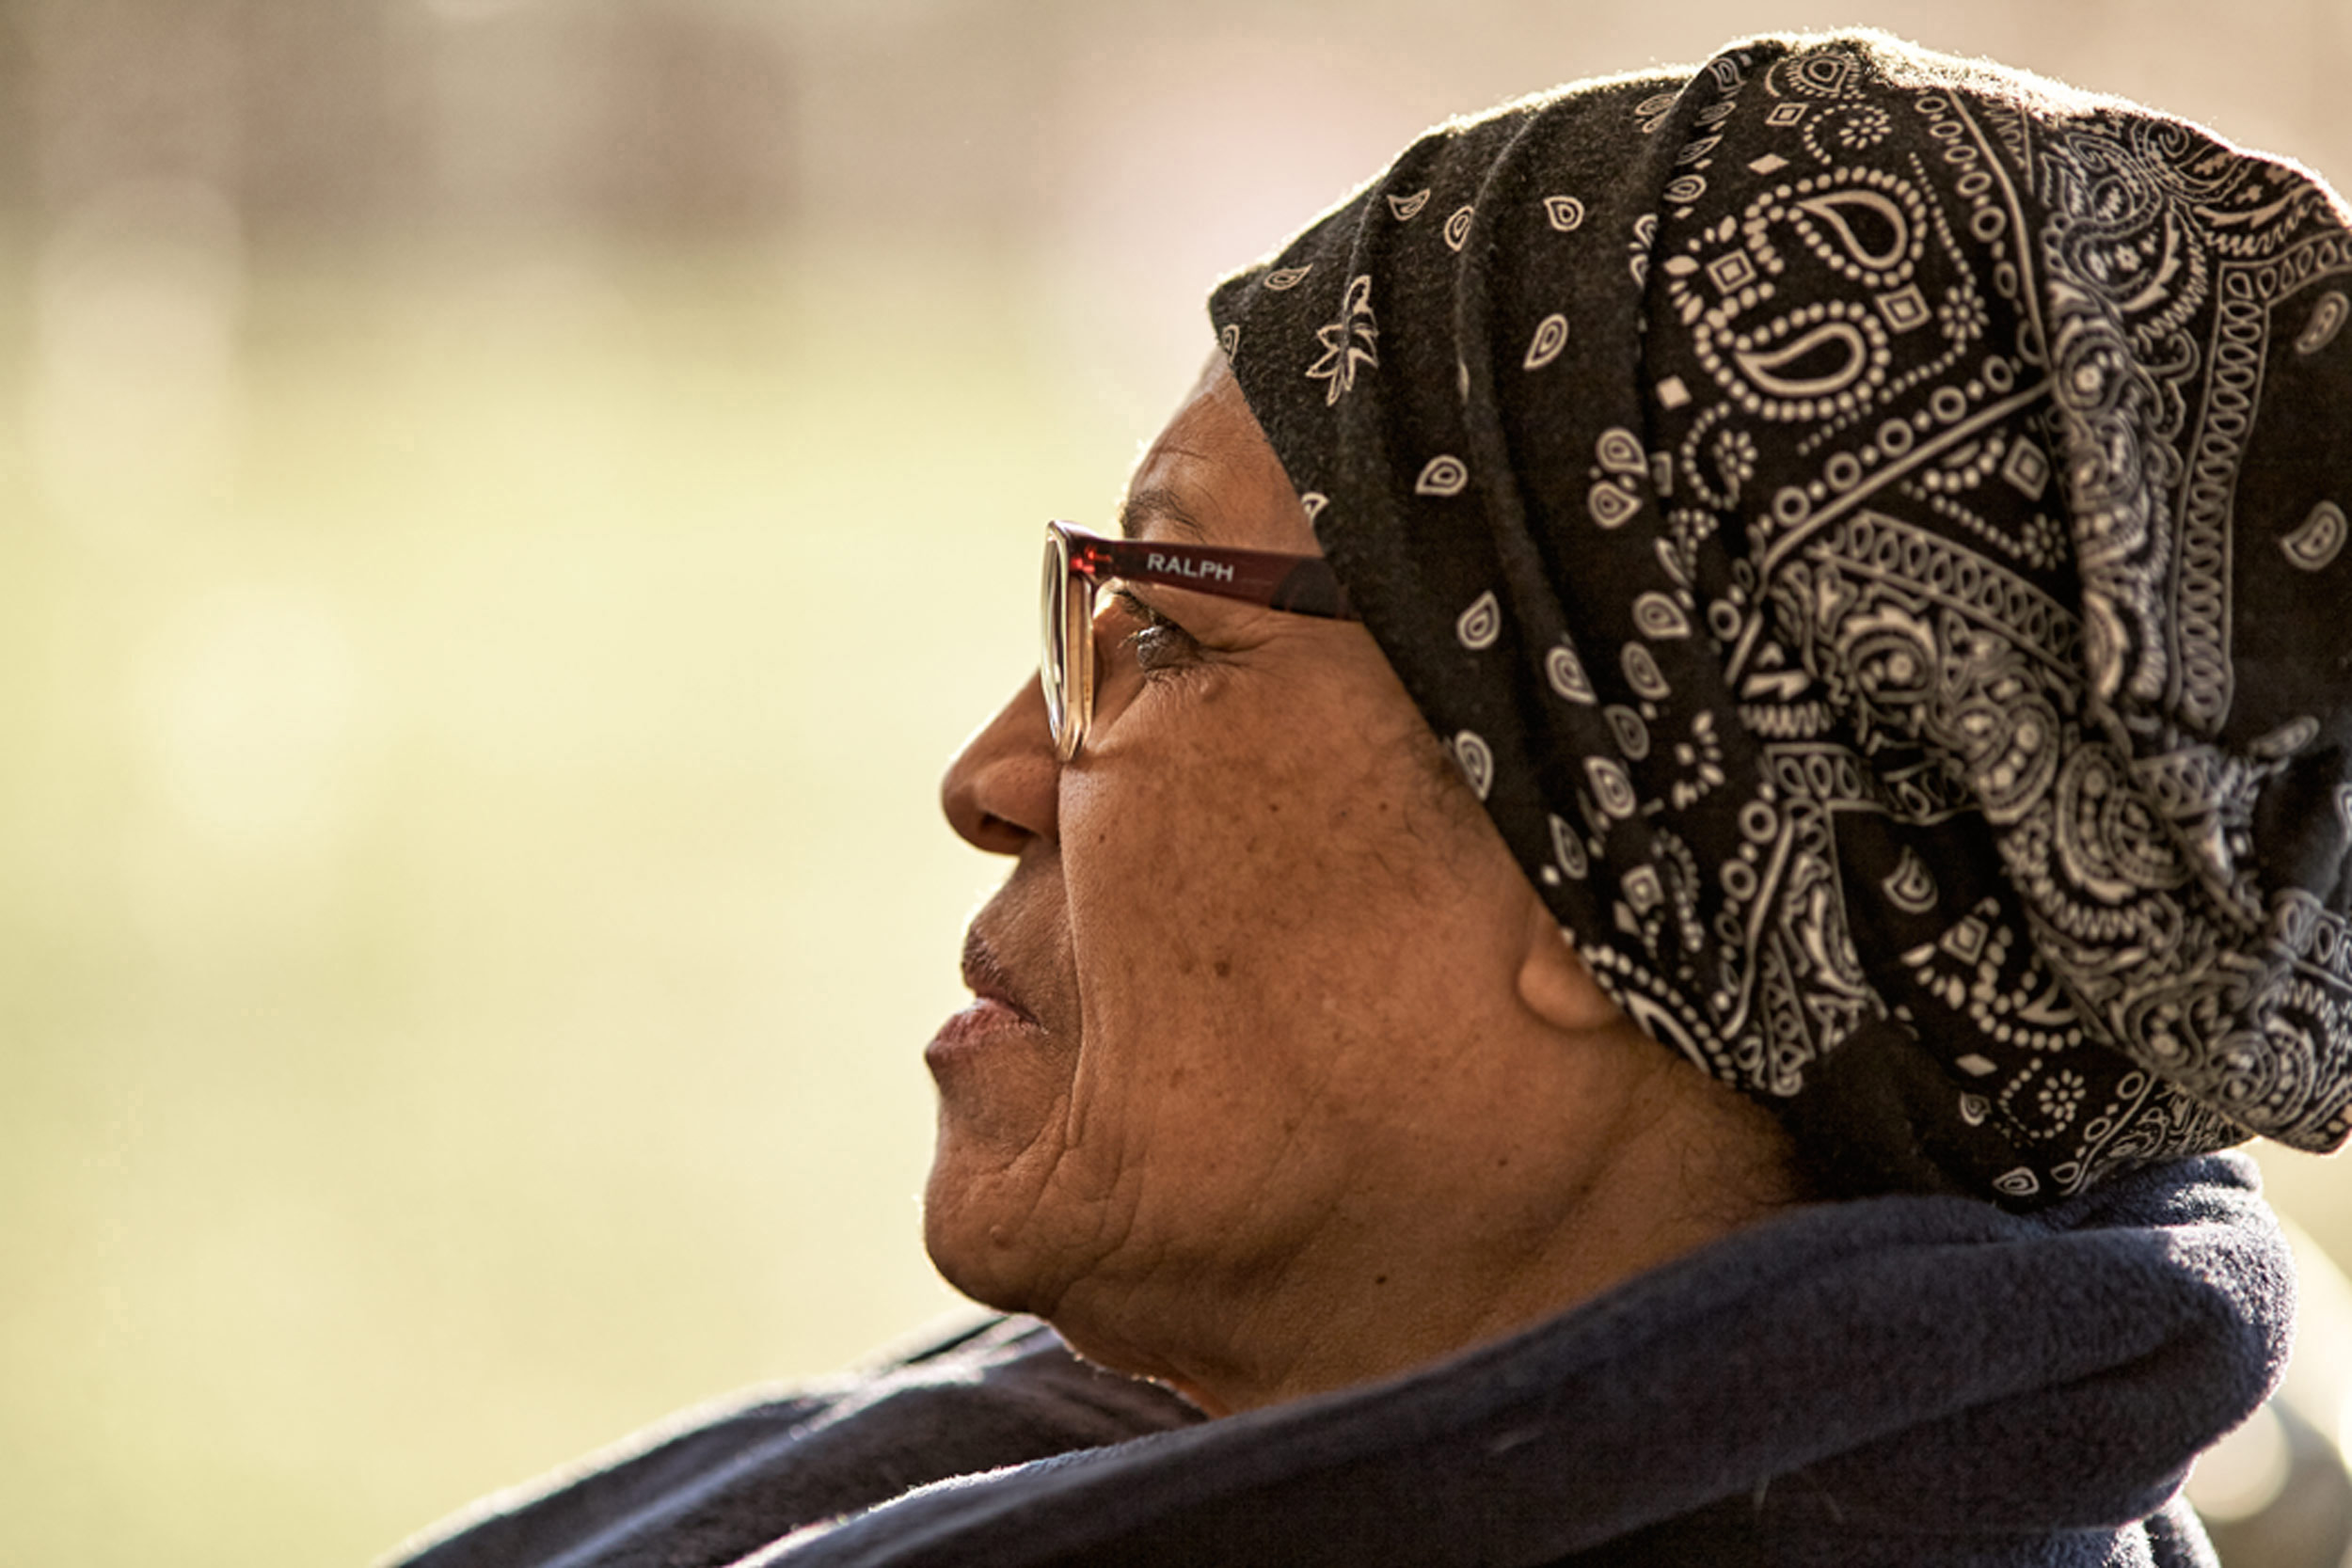 Lifestyle Portrait Using Bokeh To Enhance Scene Of Mature Woman In North Central Ohio Arrayed In Bandanna Focused On Event At Warsaw CMI Revival